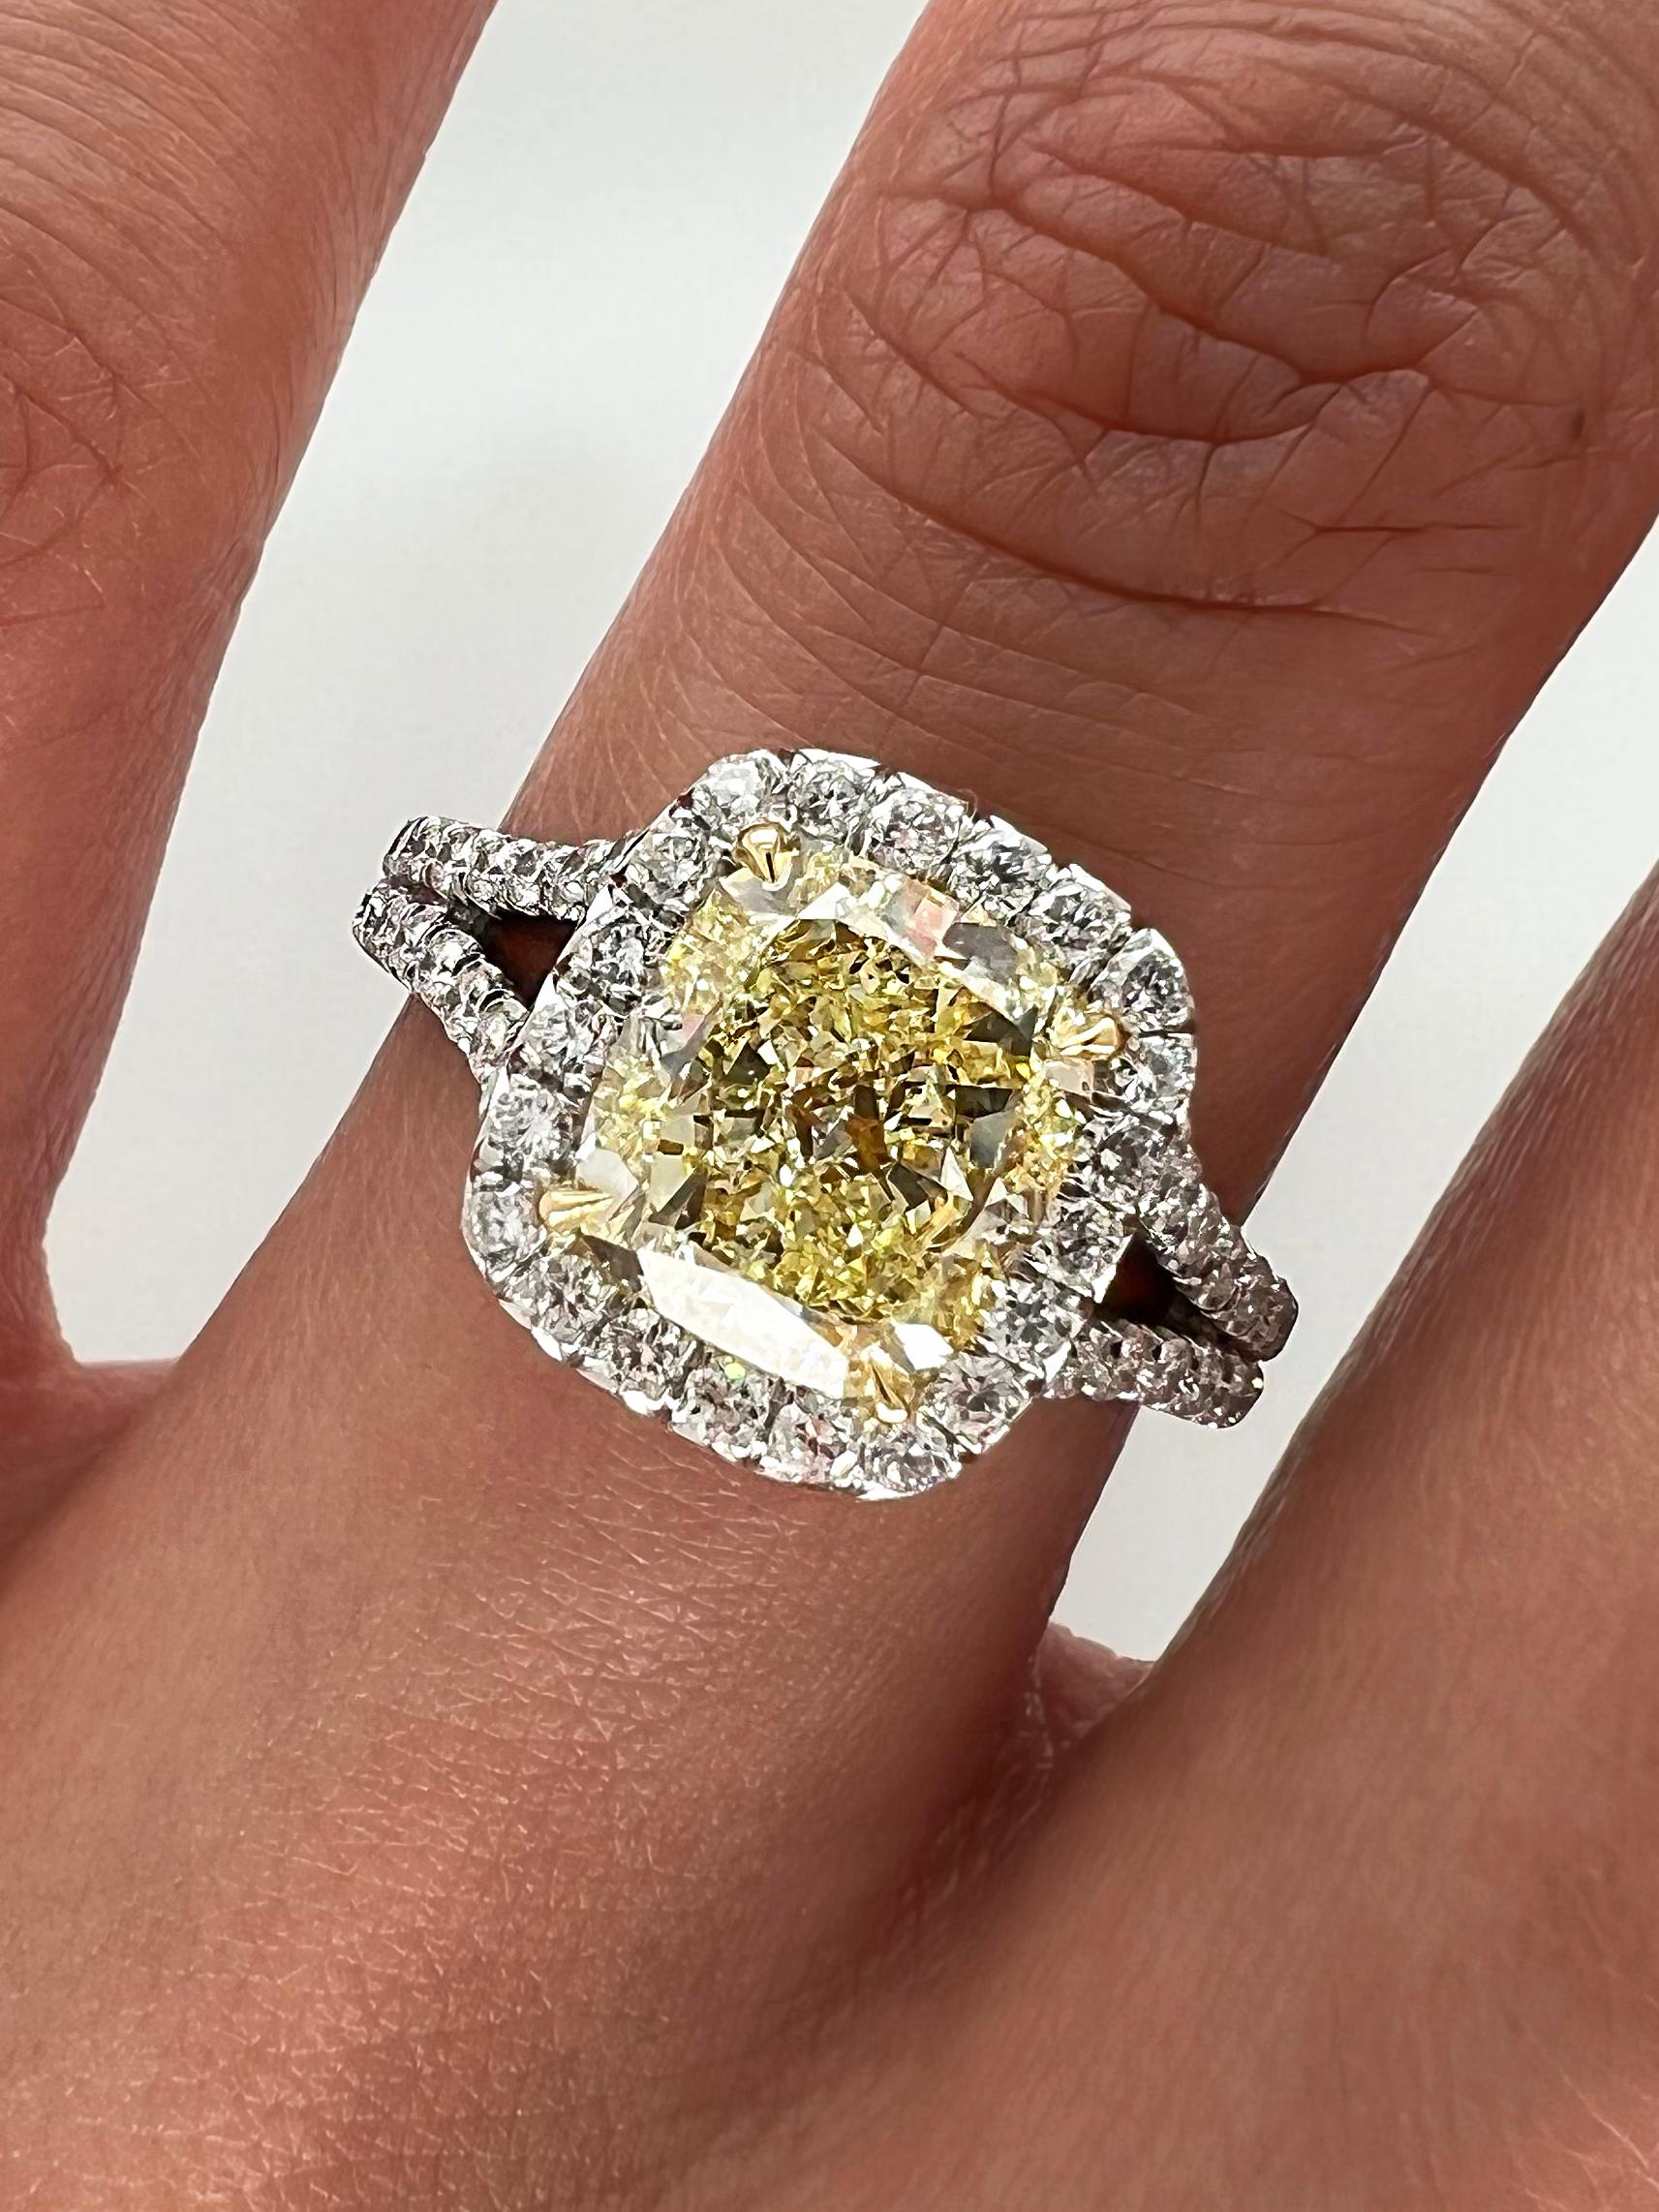 Cushion Cut 3.24 Total Carat Fancy Yellow Diamond Ladies Engagement Ring GIA For Sale